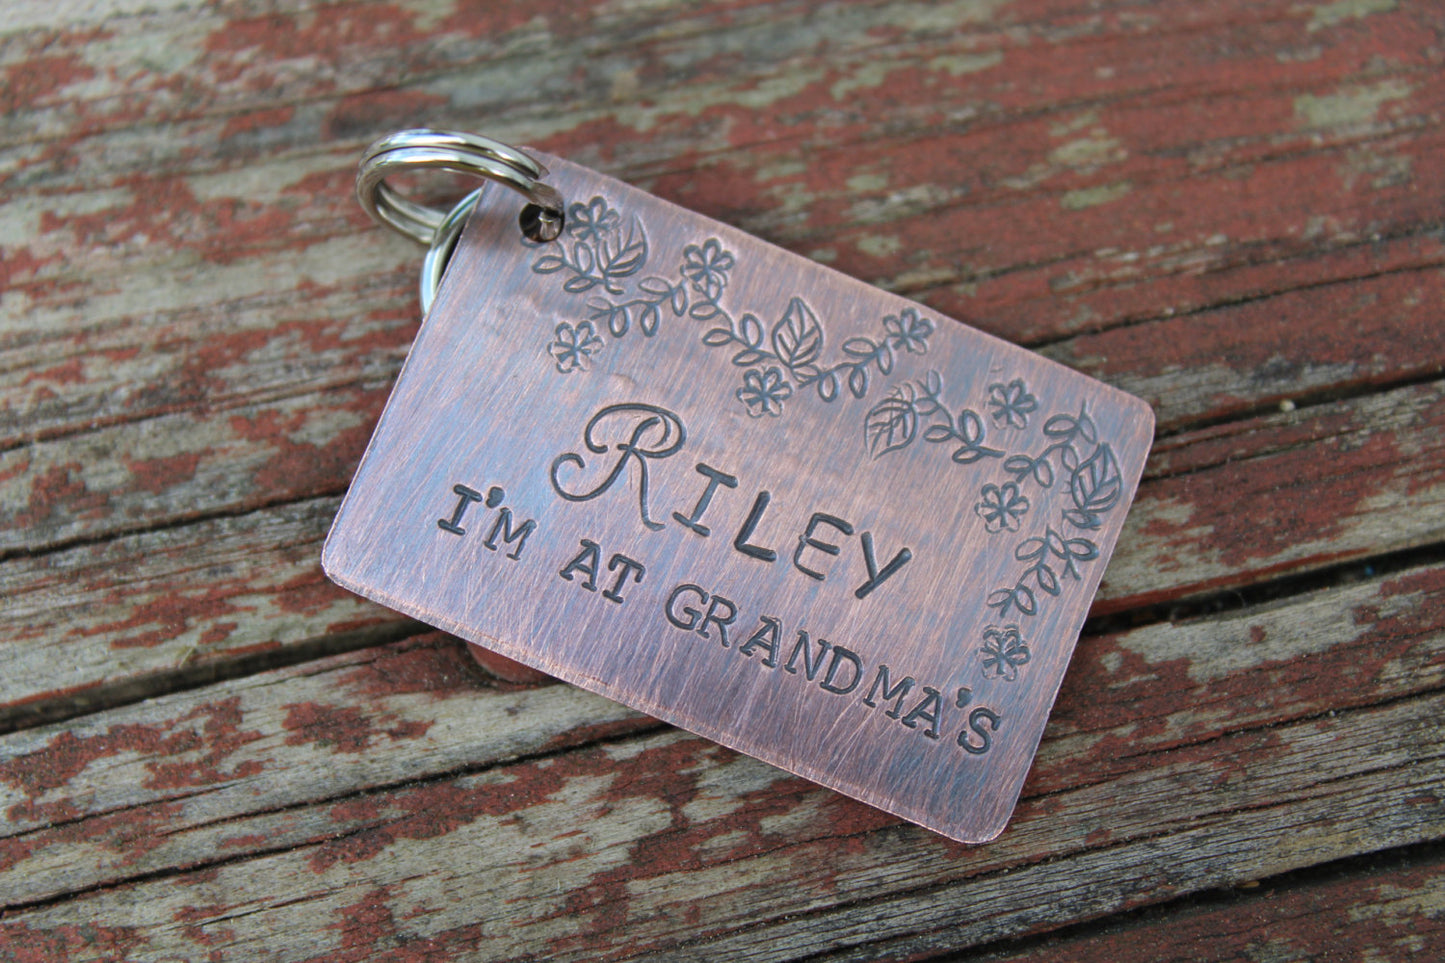 Custom Hand Stamped Dog ID Tag, The Rilely Tag, Personalized Dog Tag, Tag for Large Dog, Copper Dog Tag, Aluminum Pet ID Tag